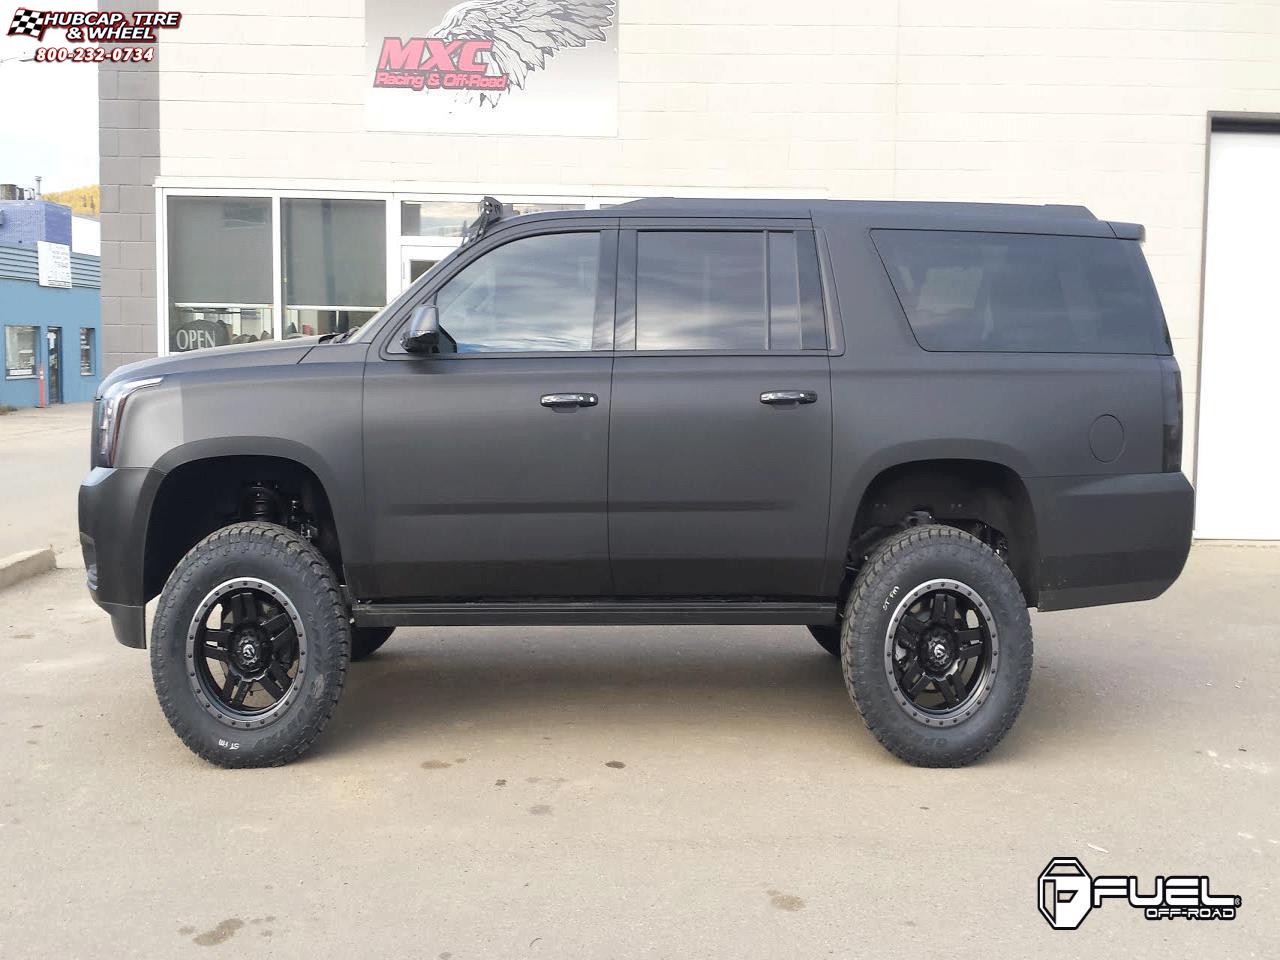 vehicle gallery/gmc yukon fuel anza d557 0X0  Matte Black w/ Anthracite Ring wheels and rims